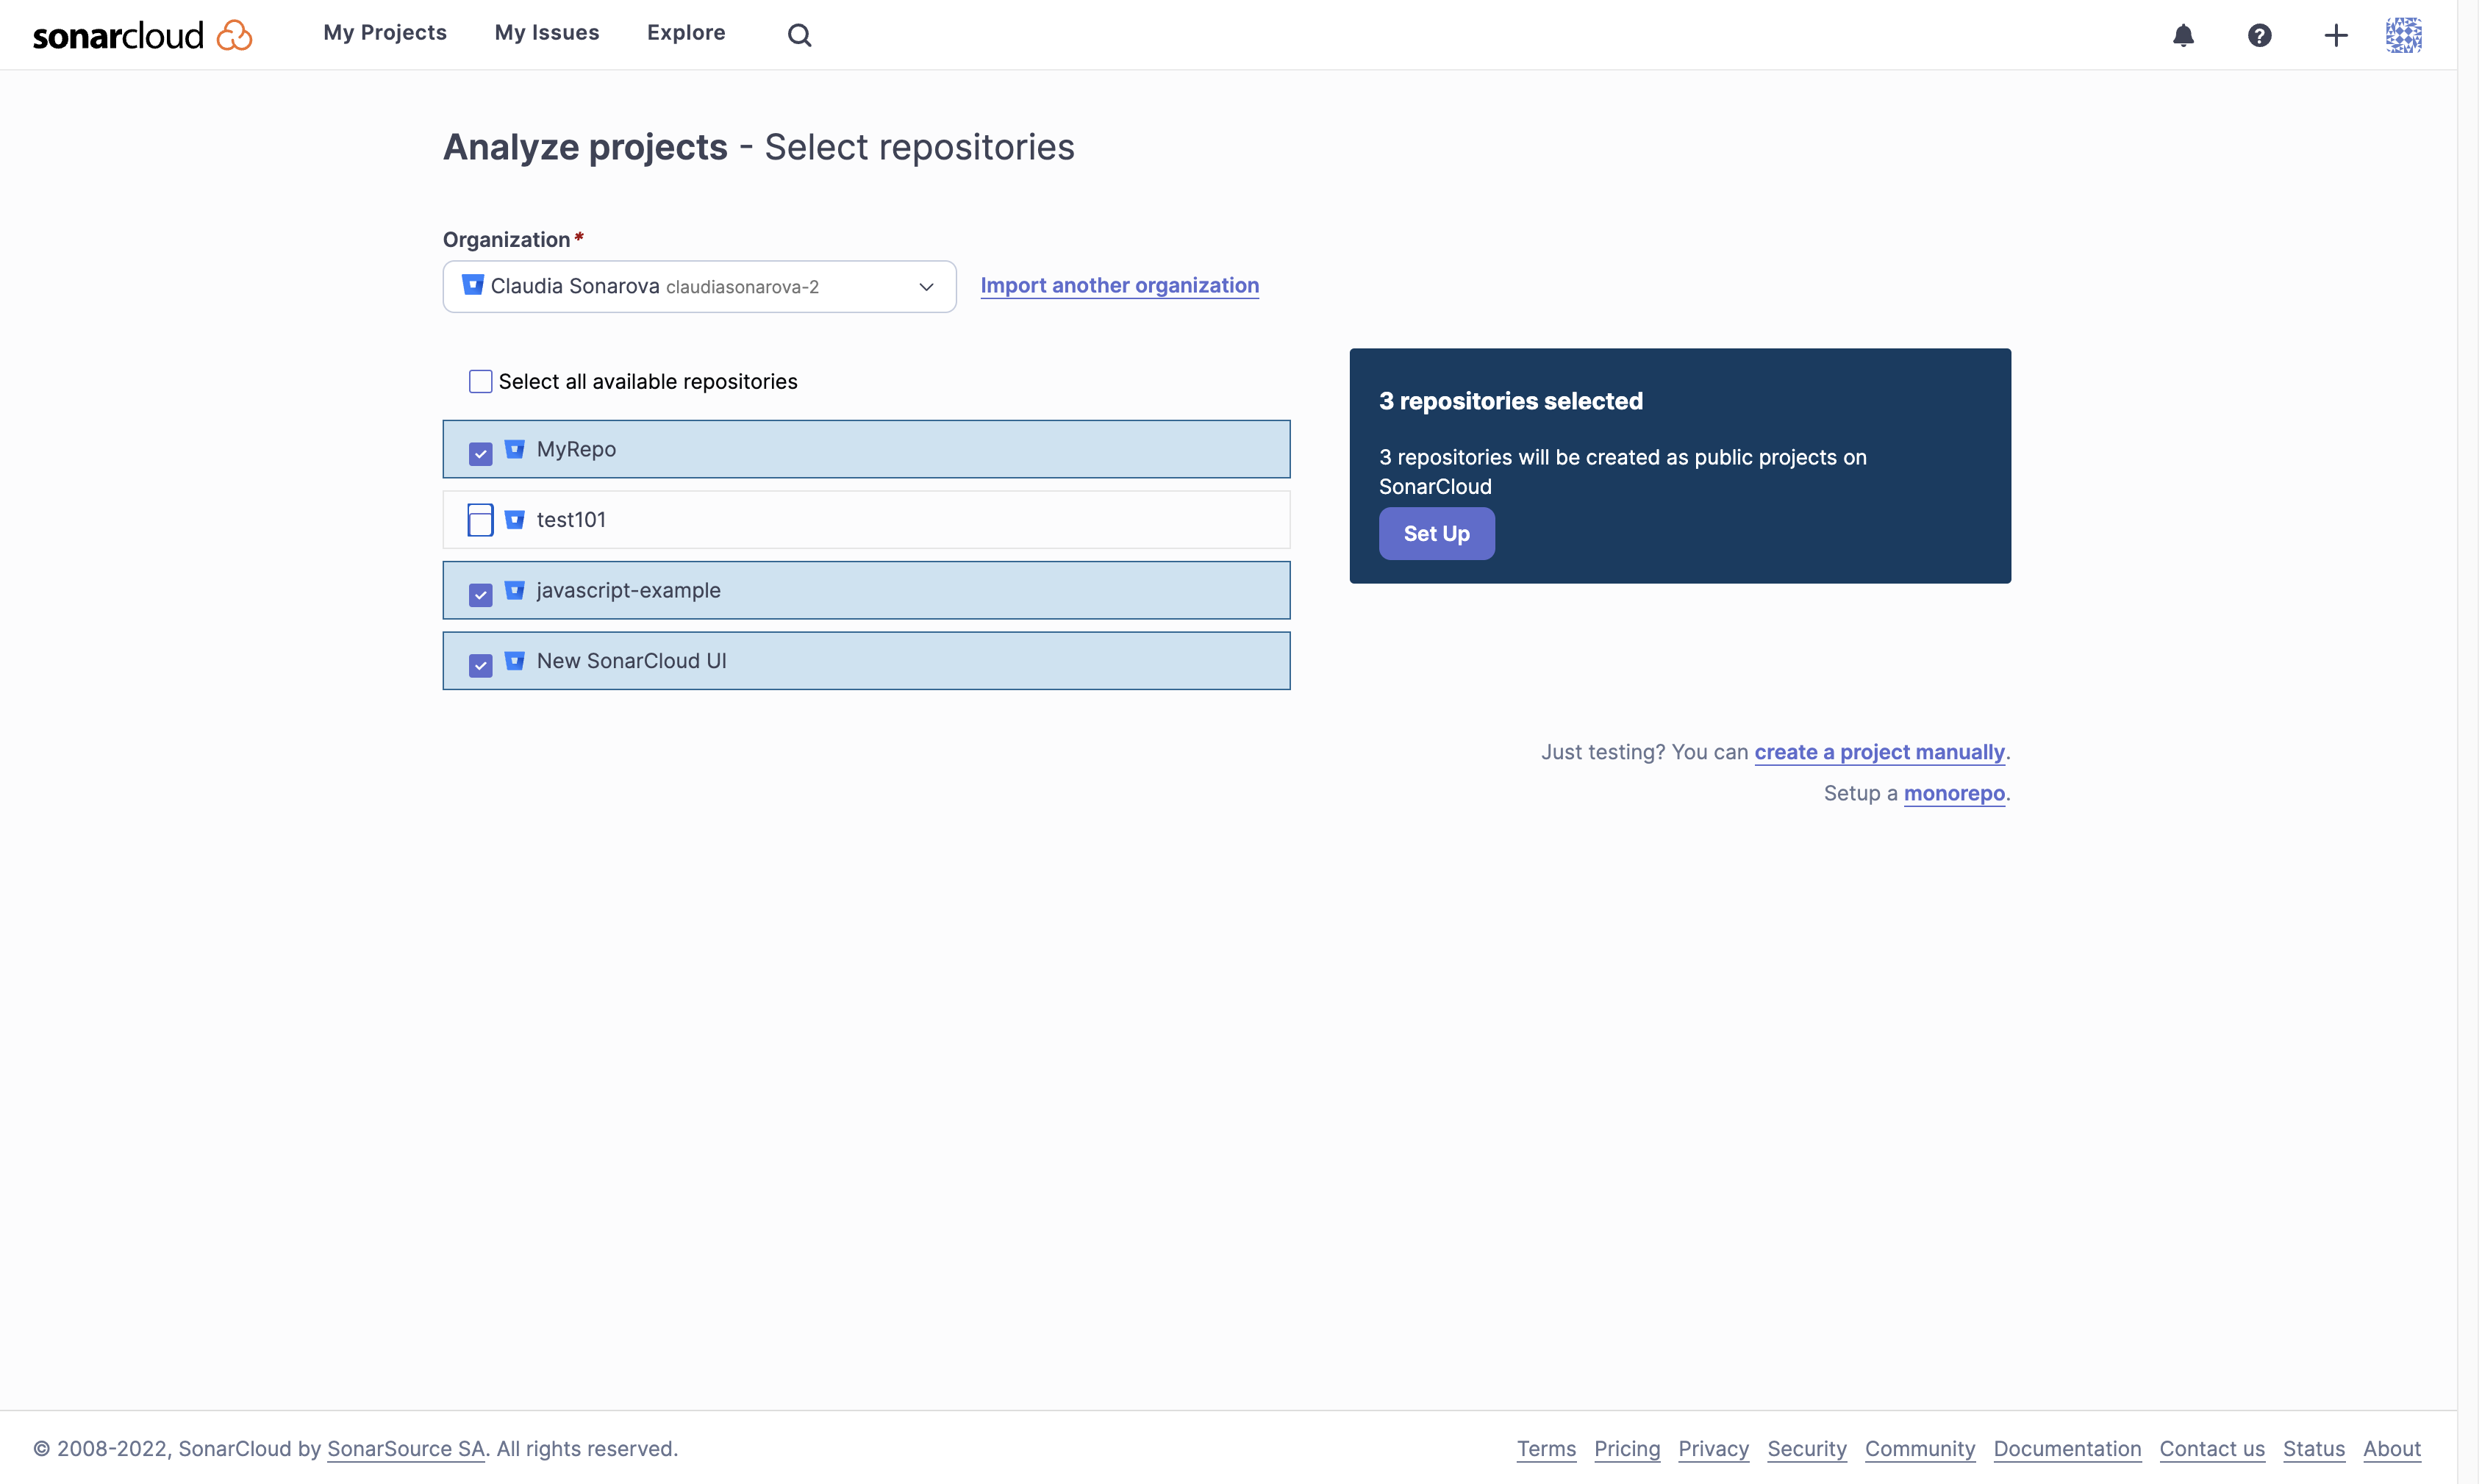 Choose the Bitbucket repositories you want to import into SonarCloud.